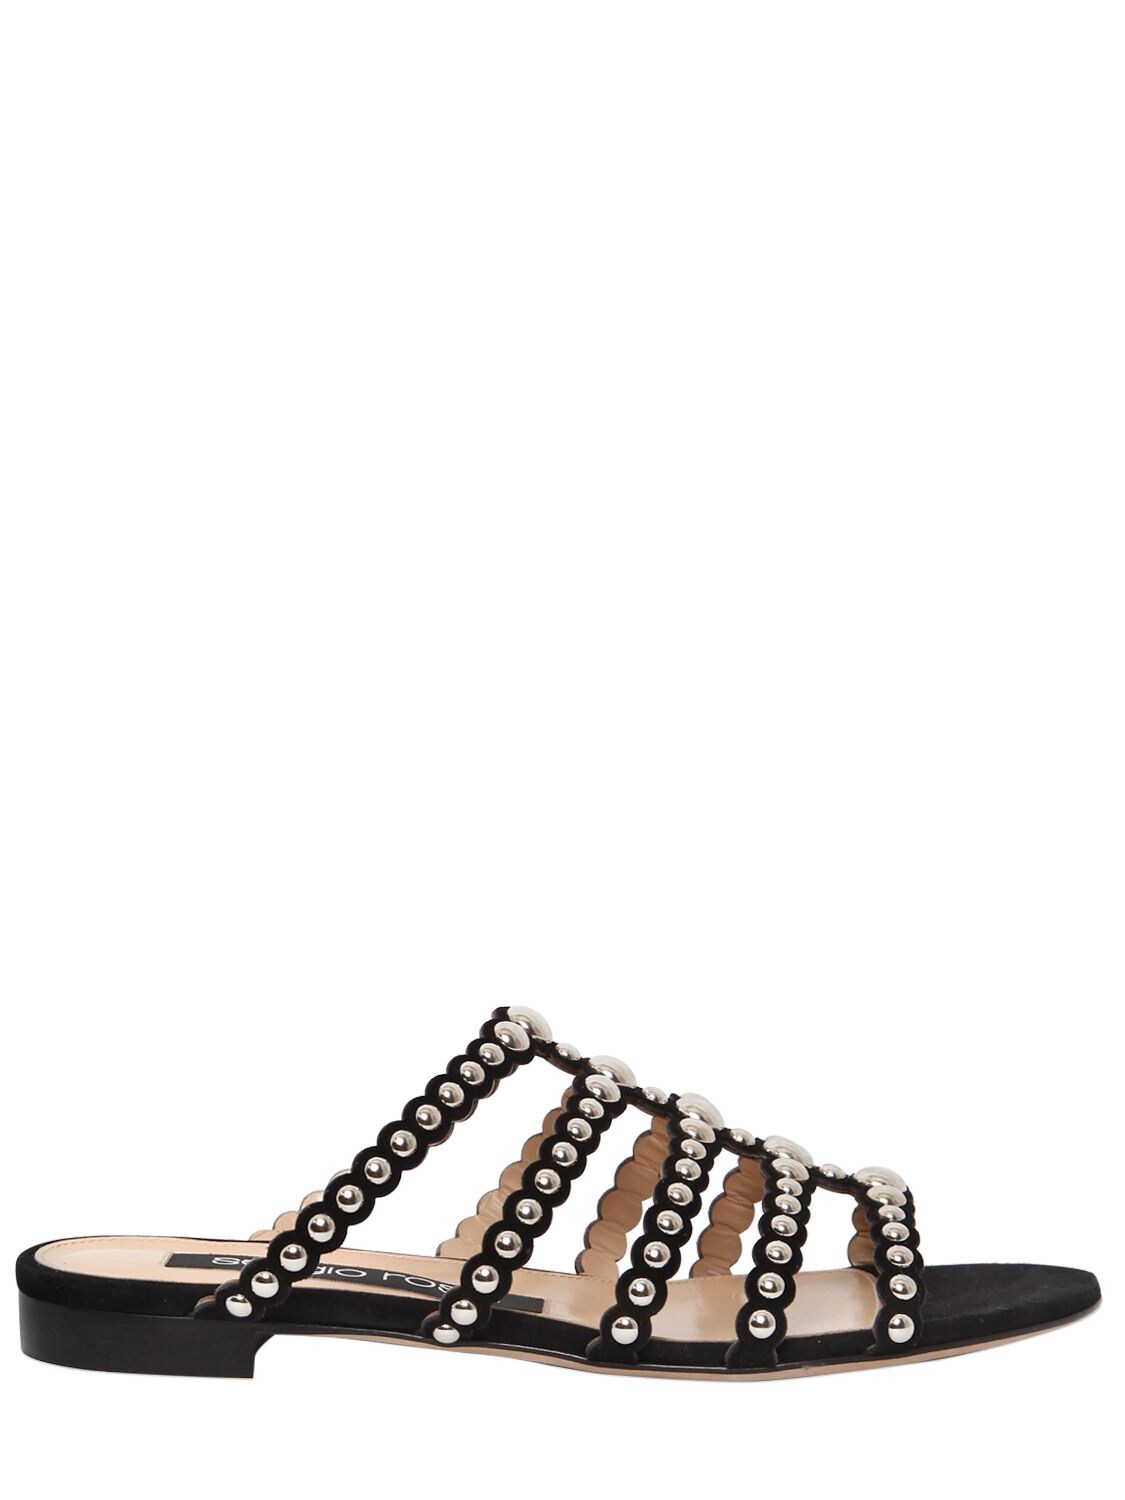 Sergio Rossi 10mm Studded Suede Slide Flats In Black